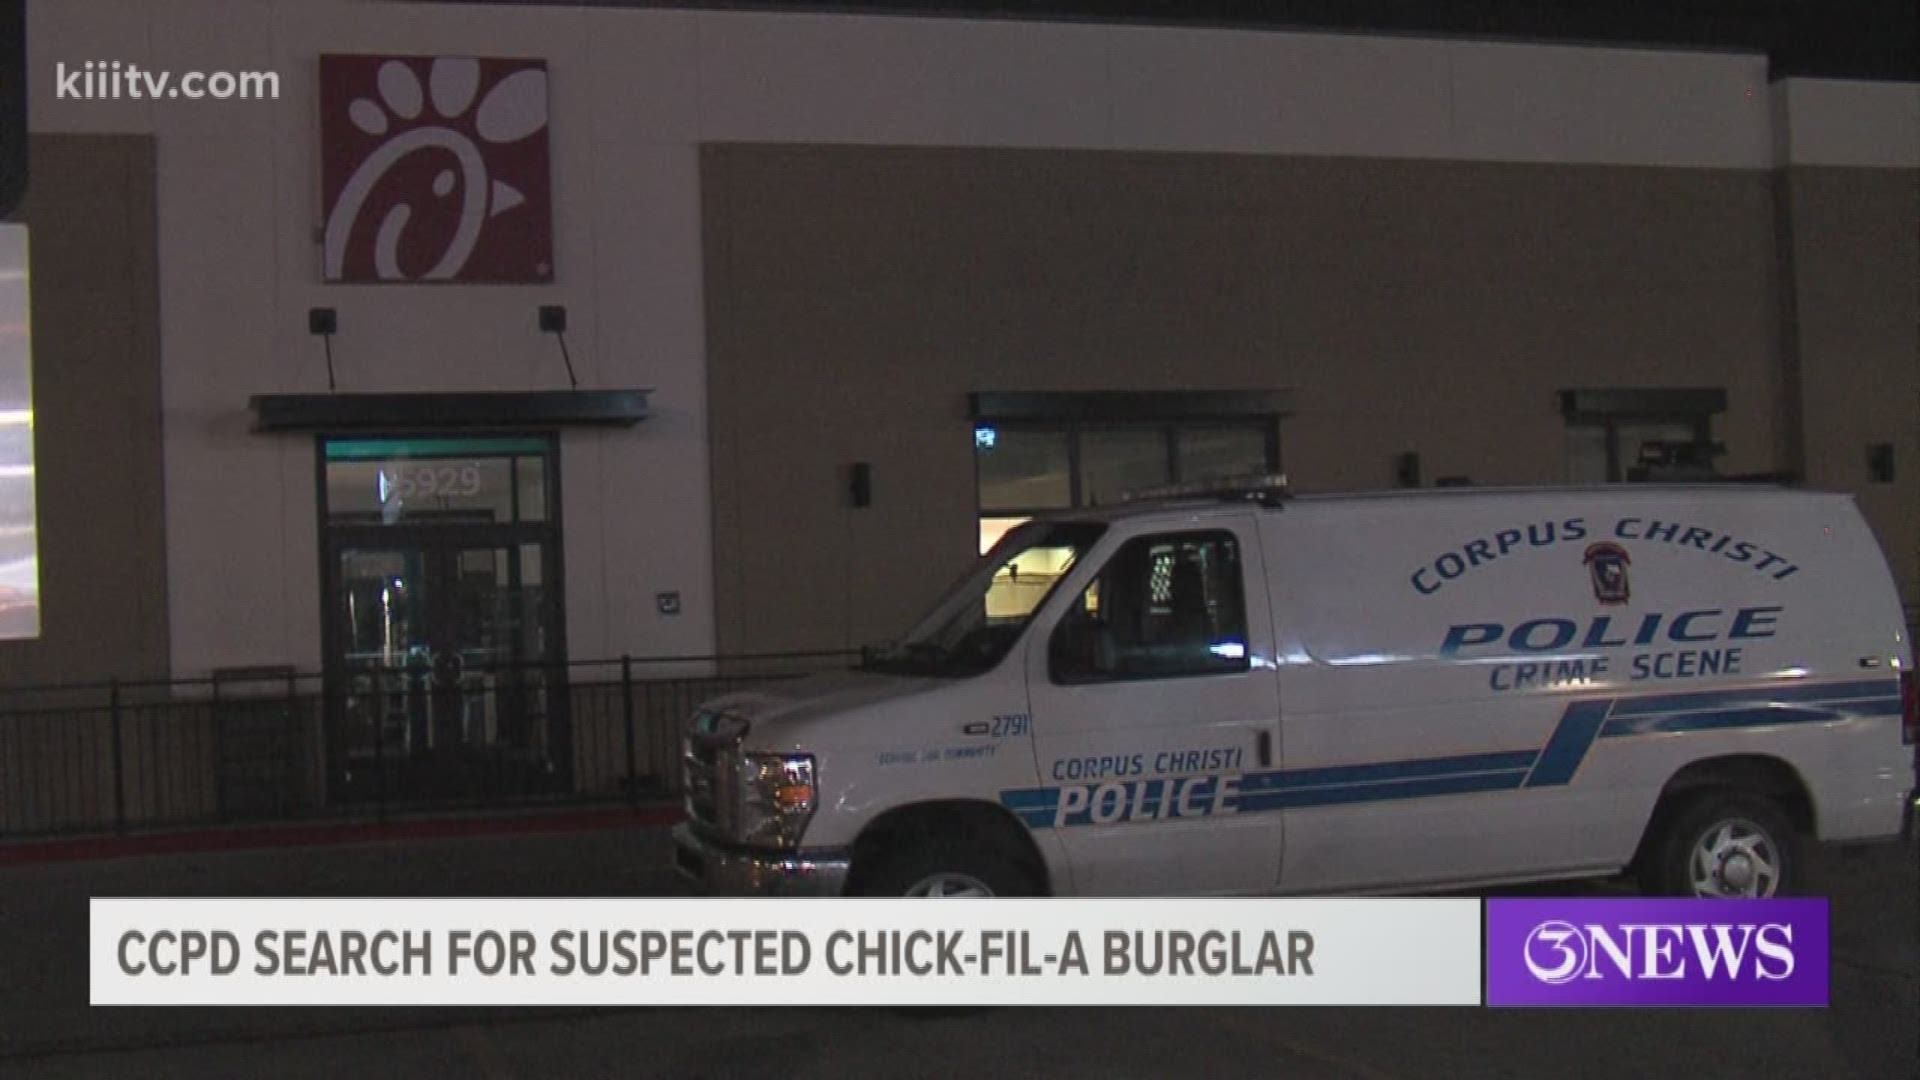 Three men are accused of breaking into the Chick-Fil-A on Saratoga around 3:30 a.m. Monday.